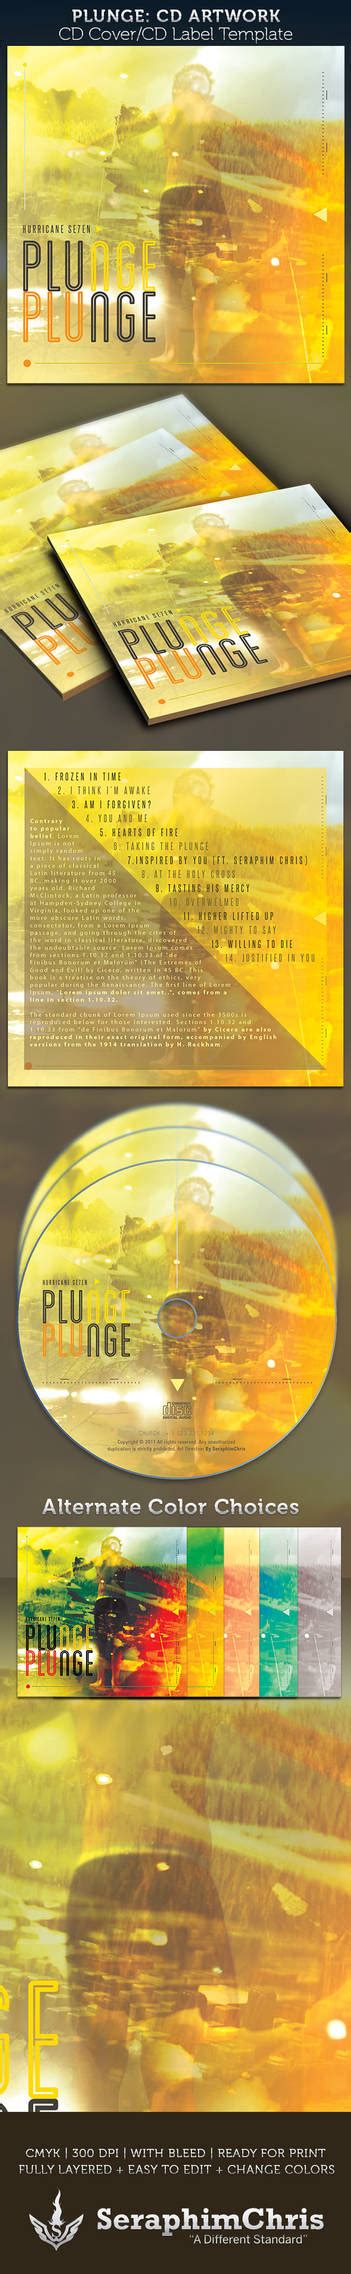 Plunge Cd Cover Artwork Template Preview By Seraphimchris On Deviantart